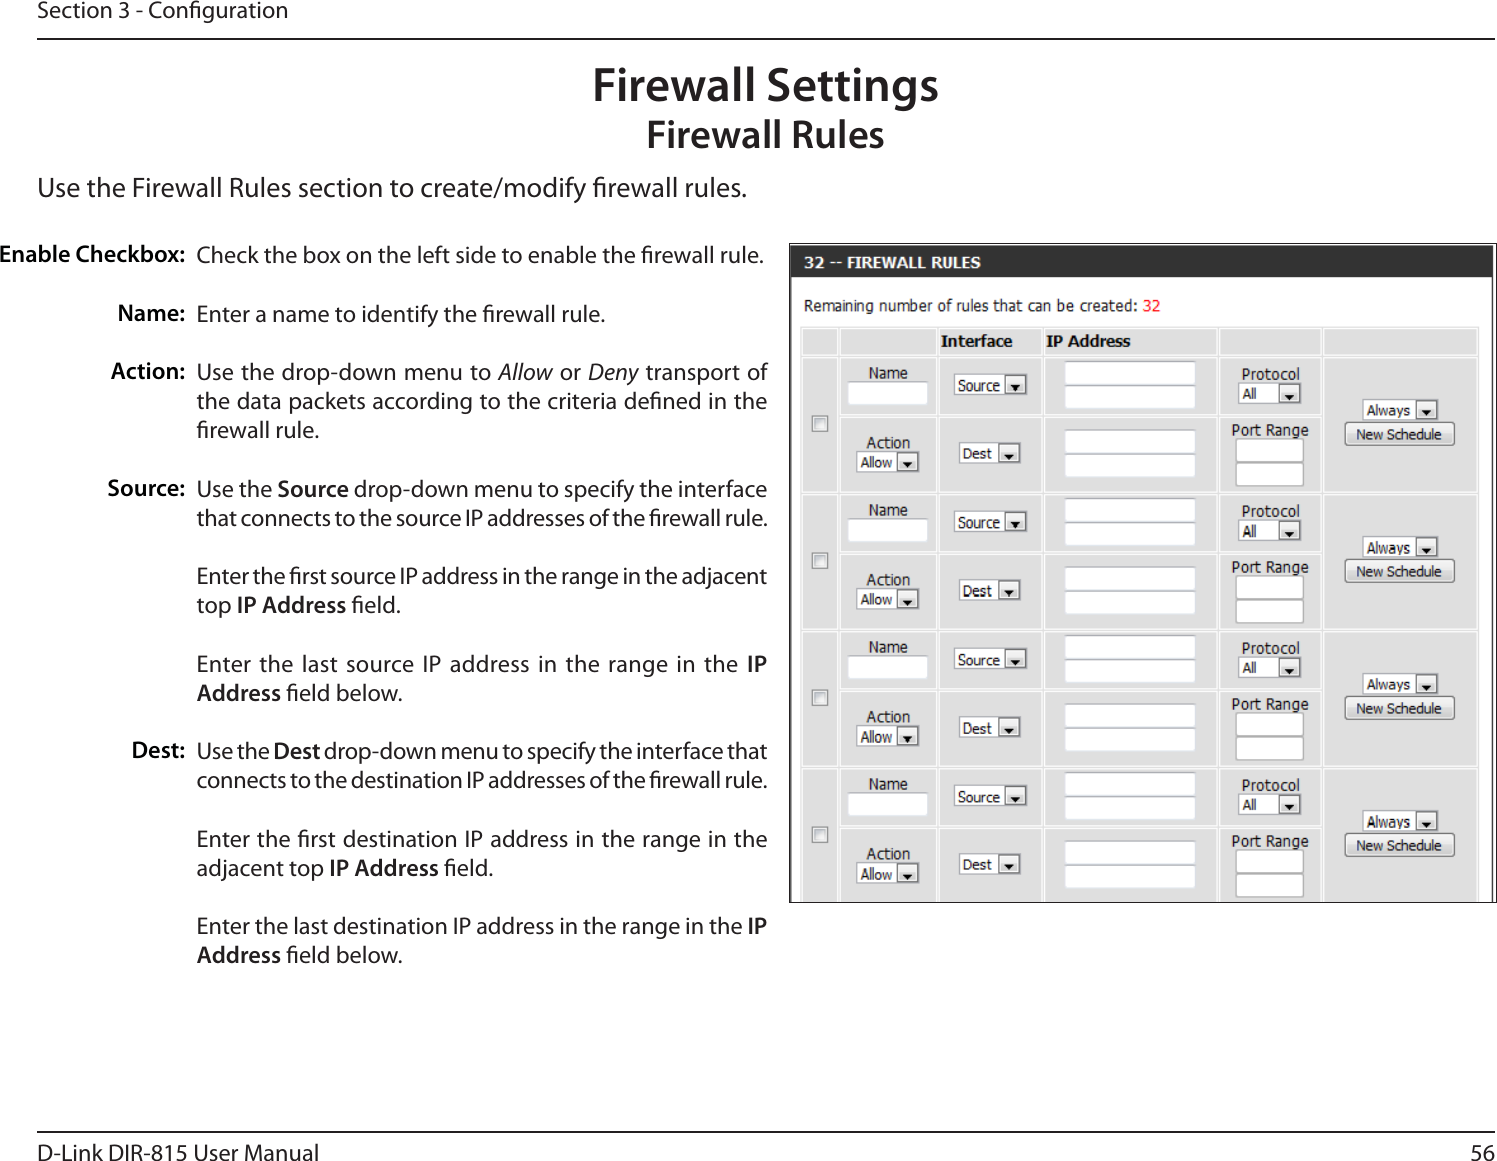 56D-Link DIR-815 User ManualSection 3 - CongurationUse the Firewall Rules section to create/modify rewall rules.Firewall SettingsFirewall RulesCheck the box on the left side to enable the rewall rule.Enter a name to identify the rewall rule.Use the drop-down menu to Allow or Deny transport of the data packets according to the criteria dened in the rewall rule.Use the Source drop-down menu to specify the interface that connects to the source IP addresses of the rewall rule. Enter the rst source IP address in the range in the adjacent top IP Address eld.Enter the last source IP address in the range in the IP Address eld below.Use the Dest drop-down menu to specify the interface that connects to the destination IP addresses of the rewall rule. Enter the rst destination IP address in the range in the adjacent top IP Address eld.Enter the last destination IP address in the range in the IP Address eld below.&amp;OBCMF$IFDLCPYName:Action:Source:Dest: